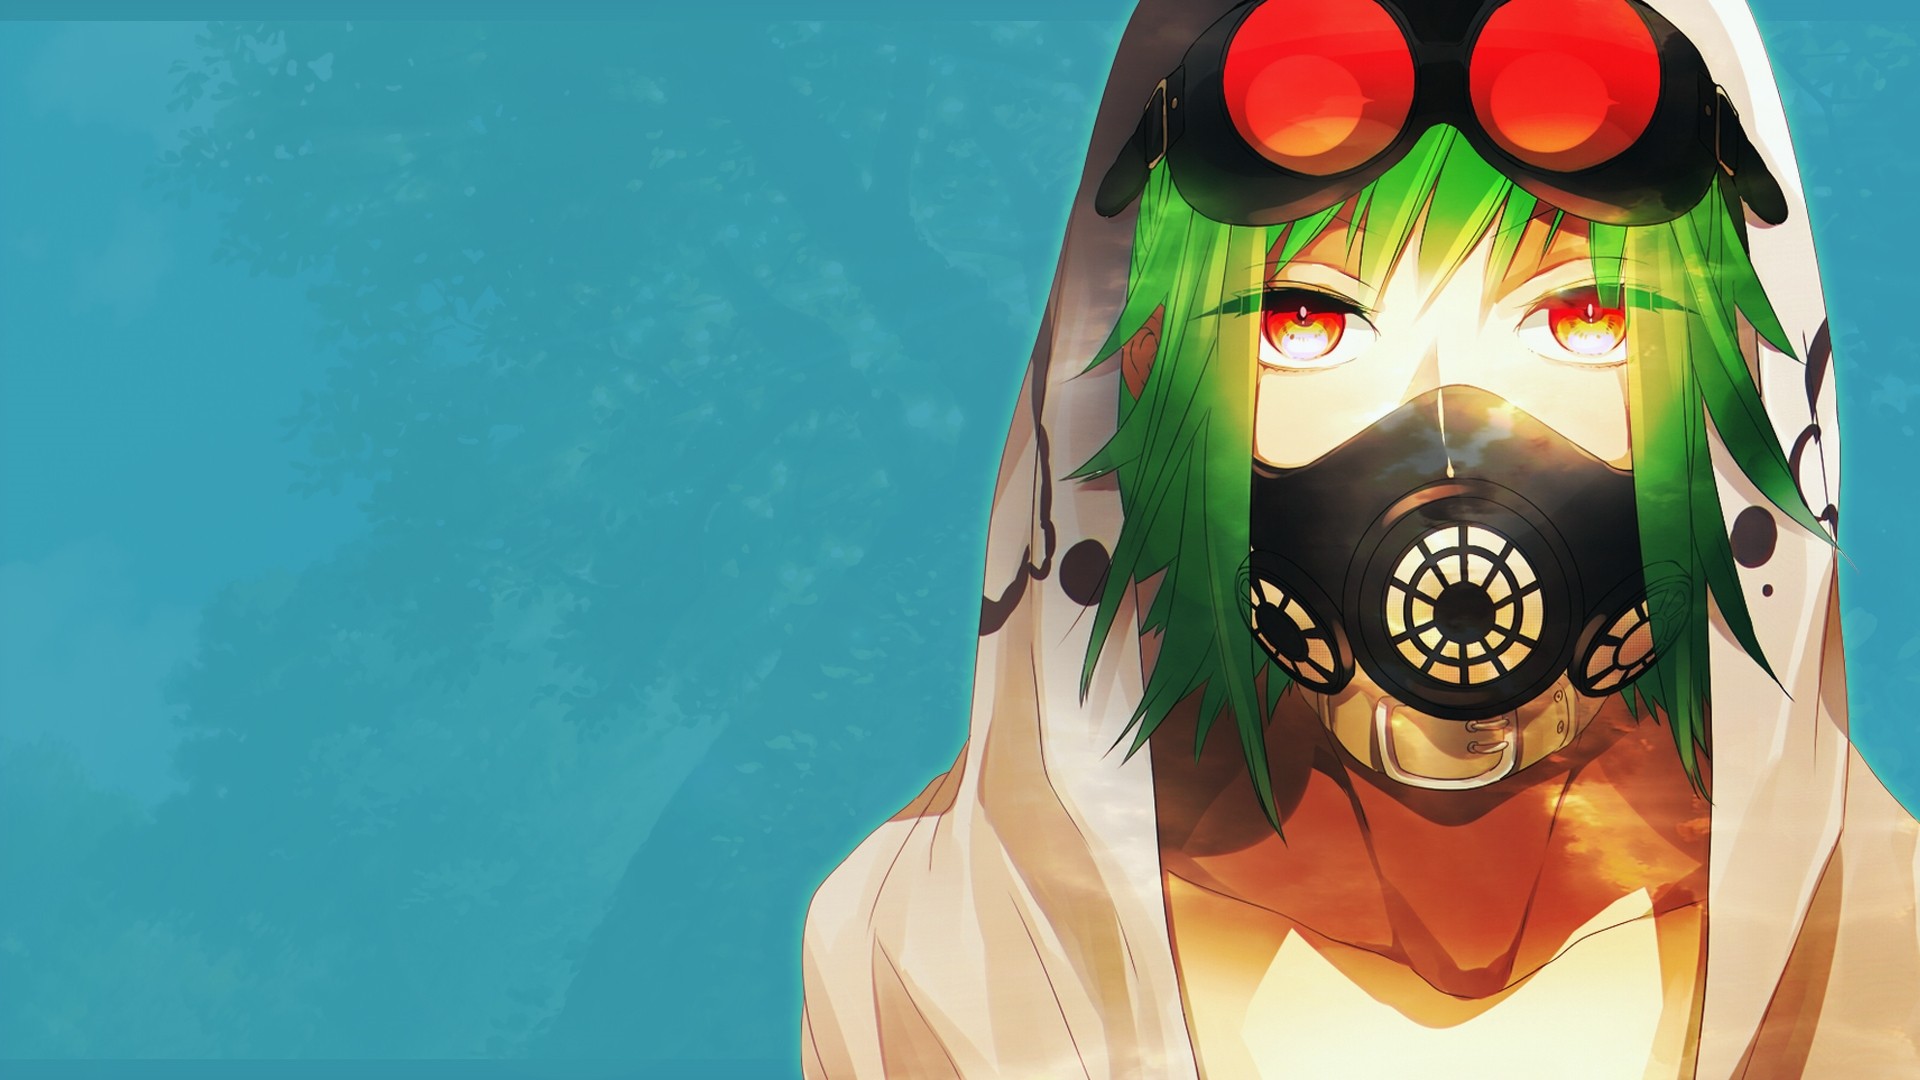 Anime Girl With Gas Mask Wallpaper